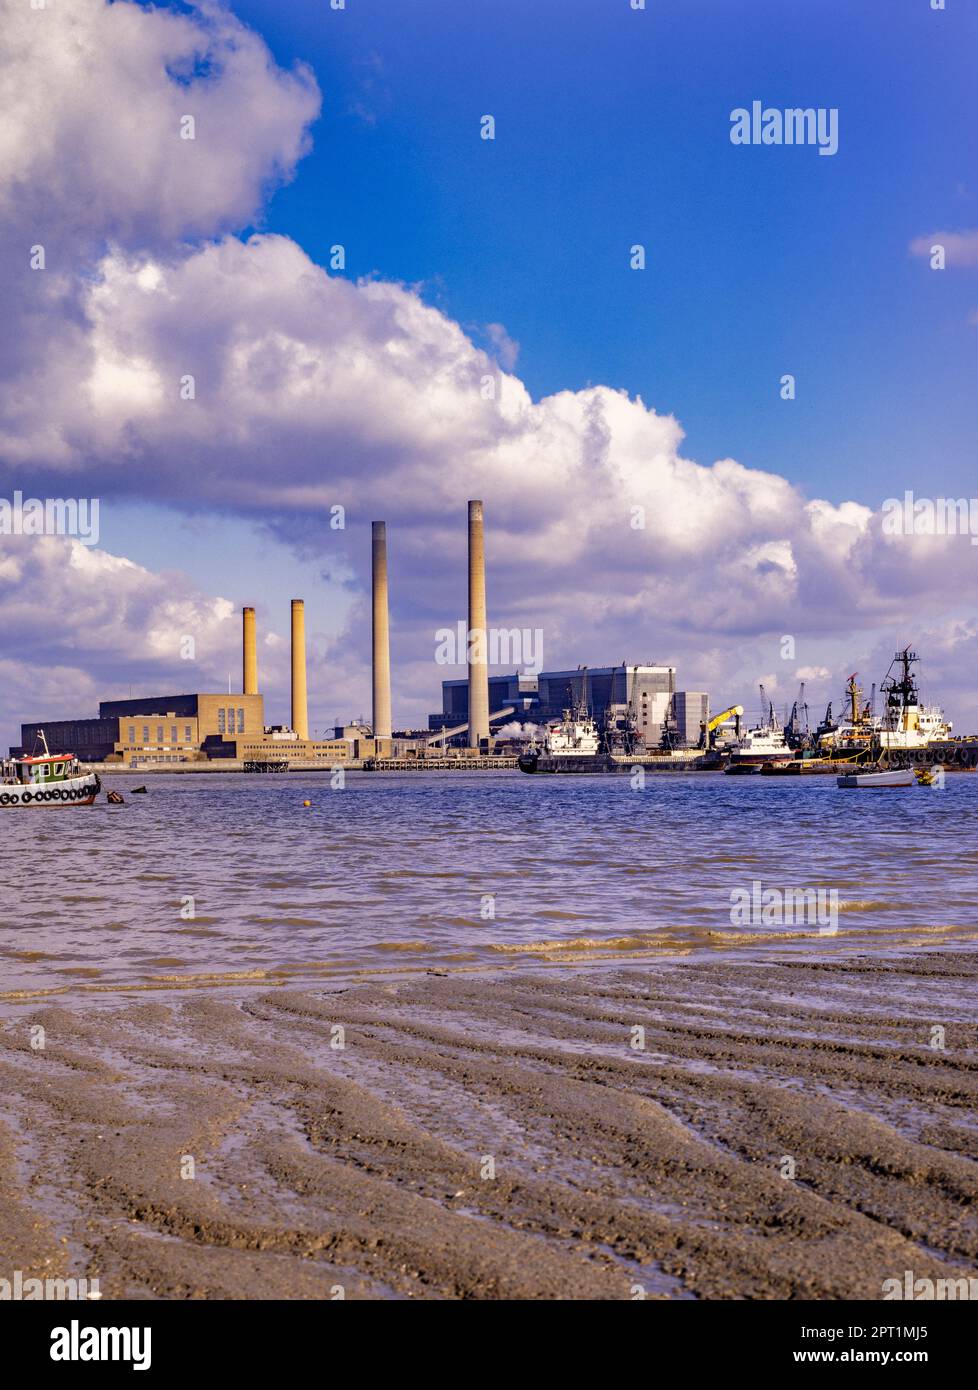 Historic image of the Thams from gravesend with Tilbury A and B Power stations Taken in 1986 Stock Photo